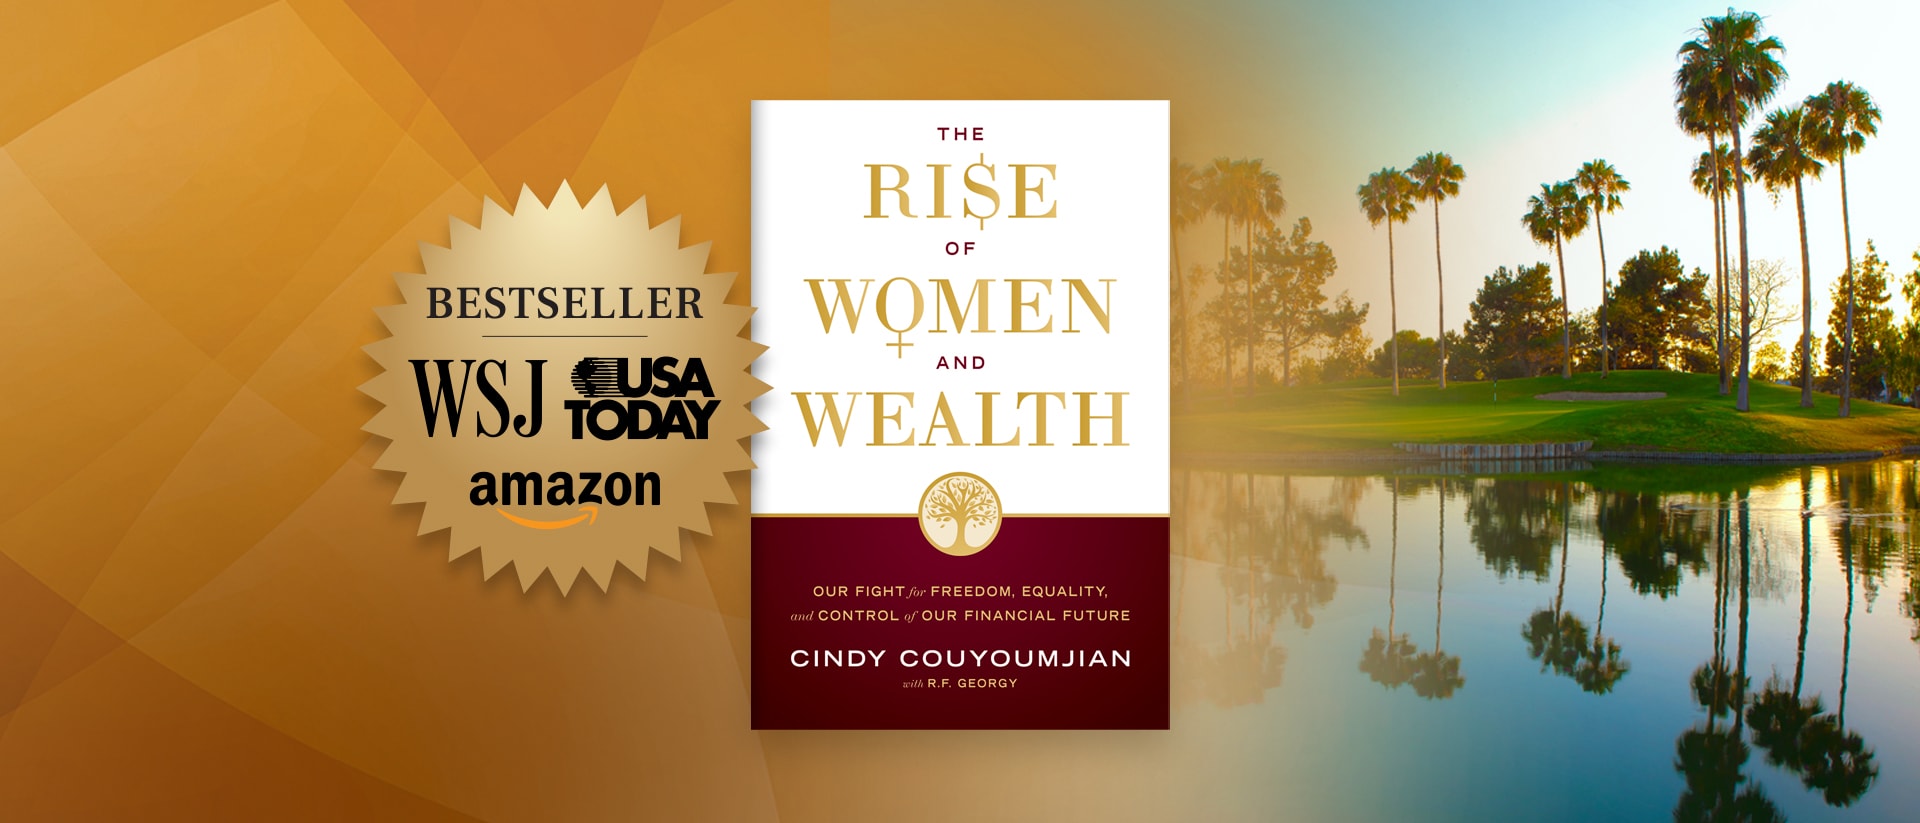 Cindy Couyoumjian unveils her new book